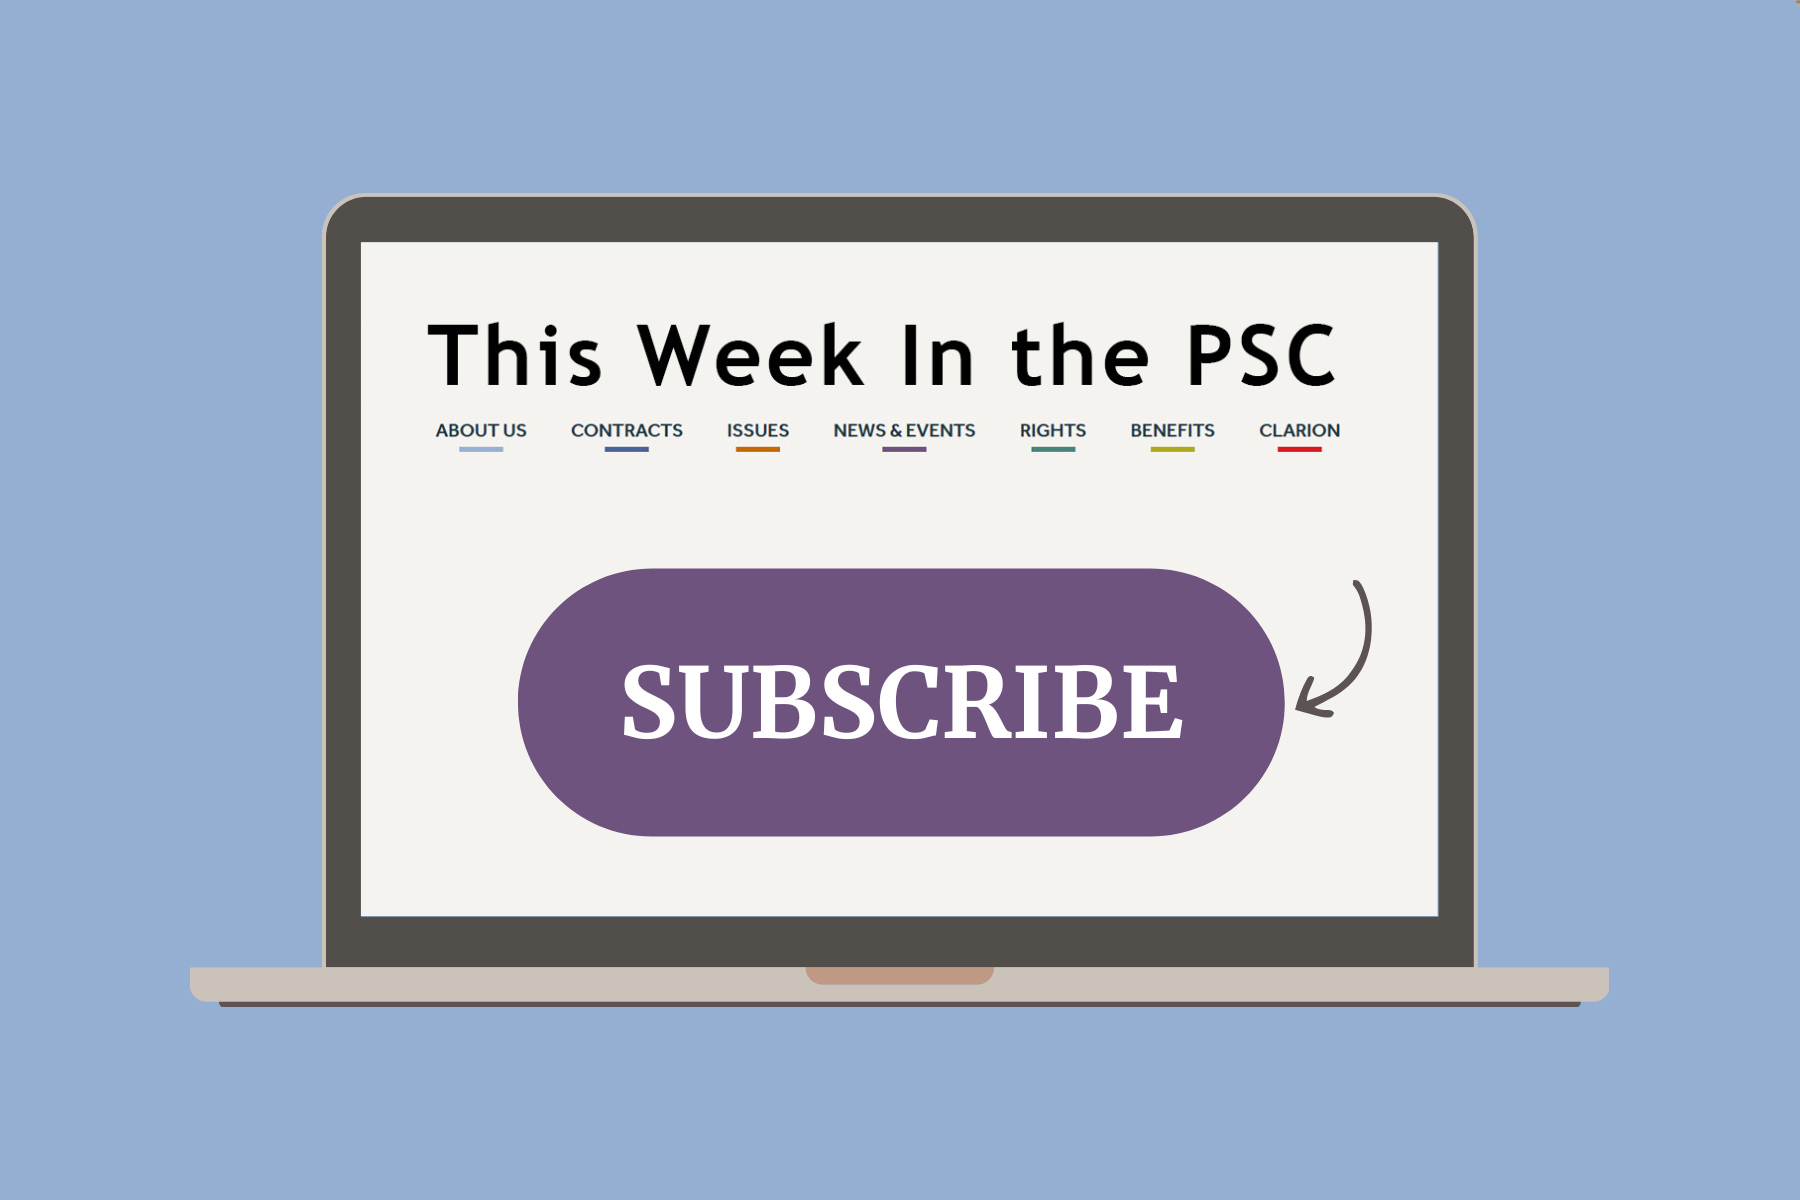 Sign up for the PSC's E-Newsletter.